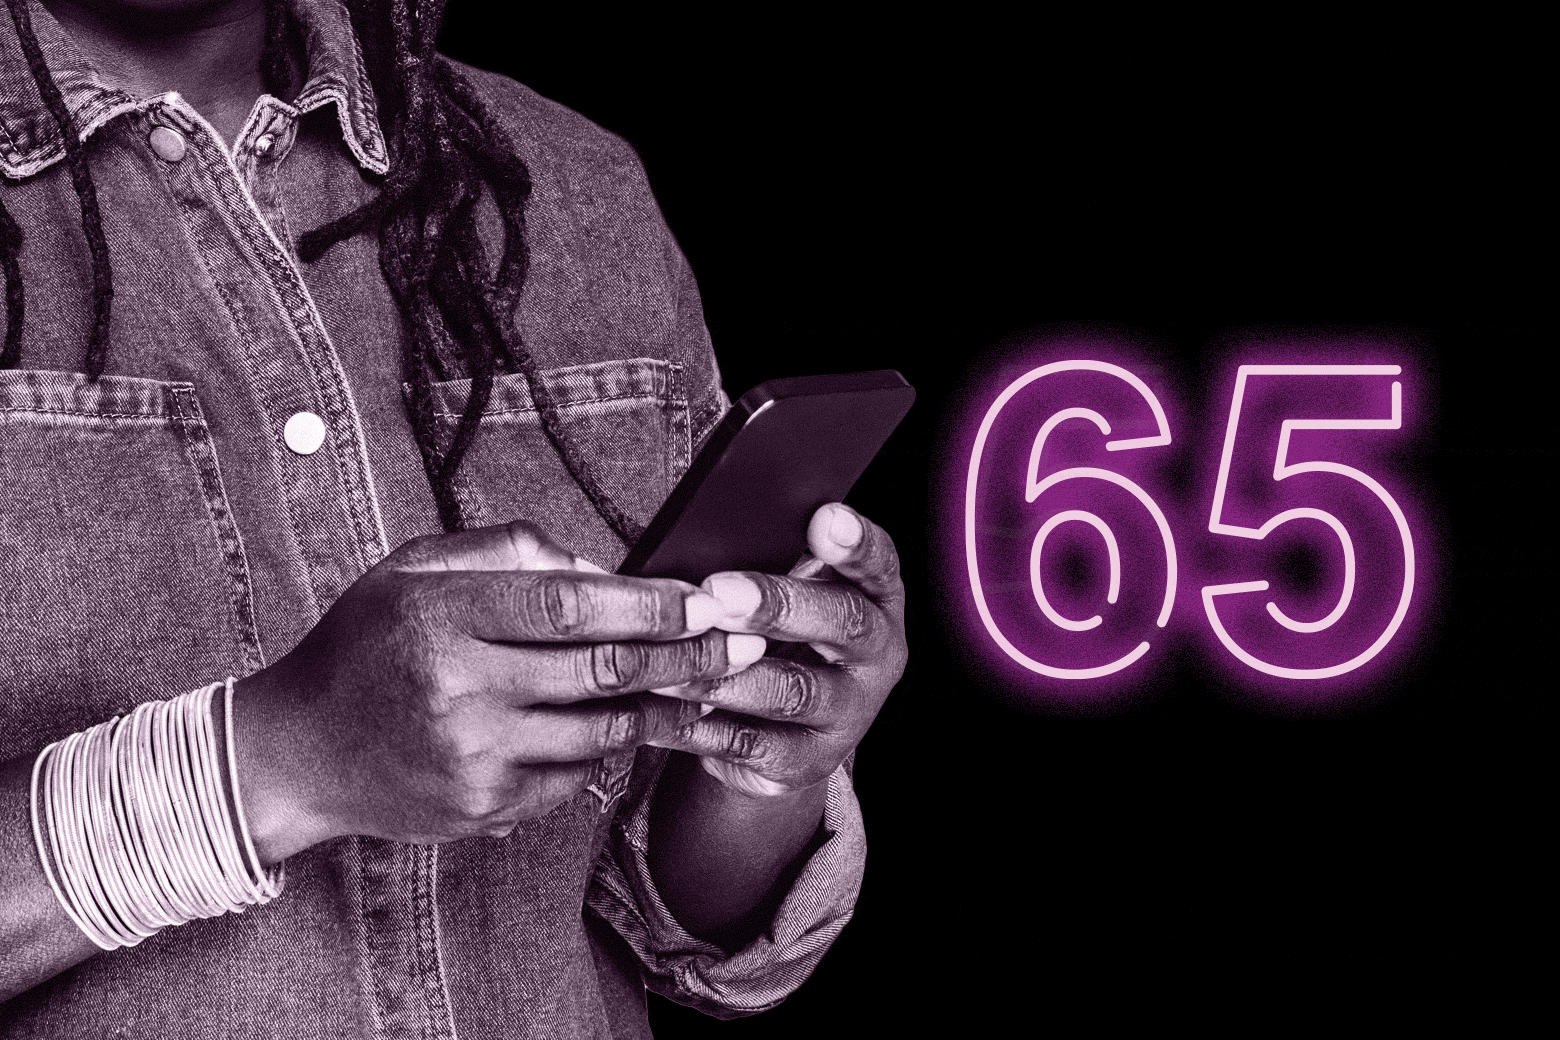 A woman holds a phone next to an alternating 65/55 neon sign.